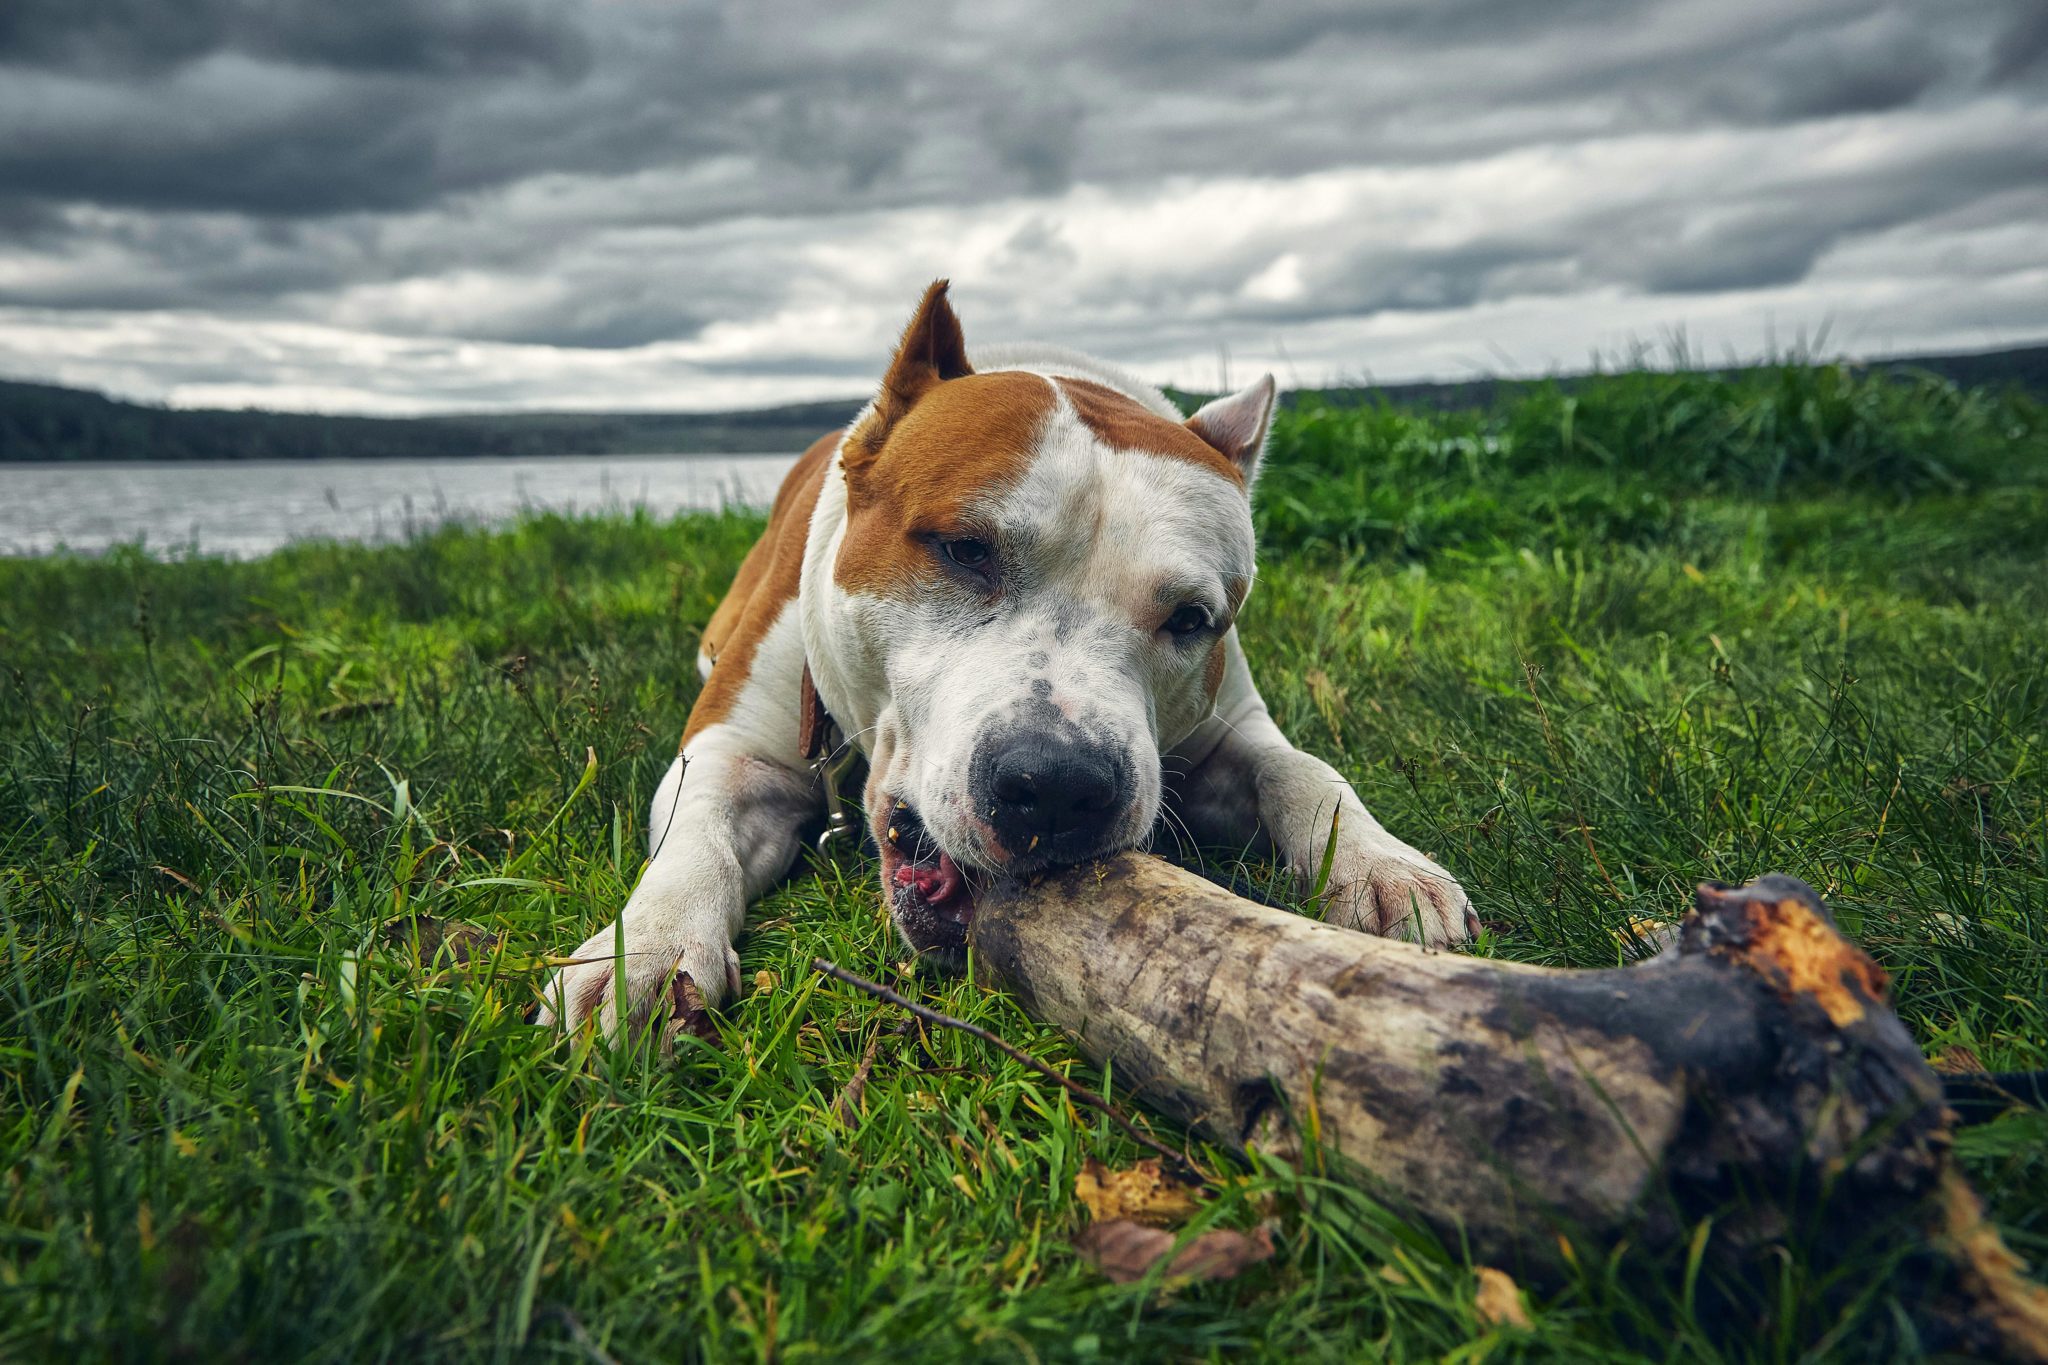 The American Staffordshire terrier enjoying some well earned play time in the open nature